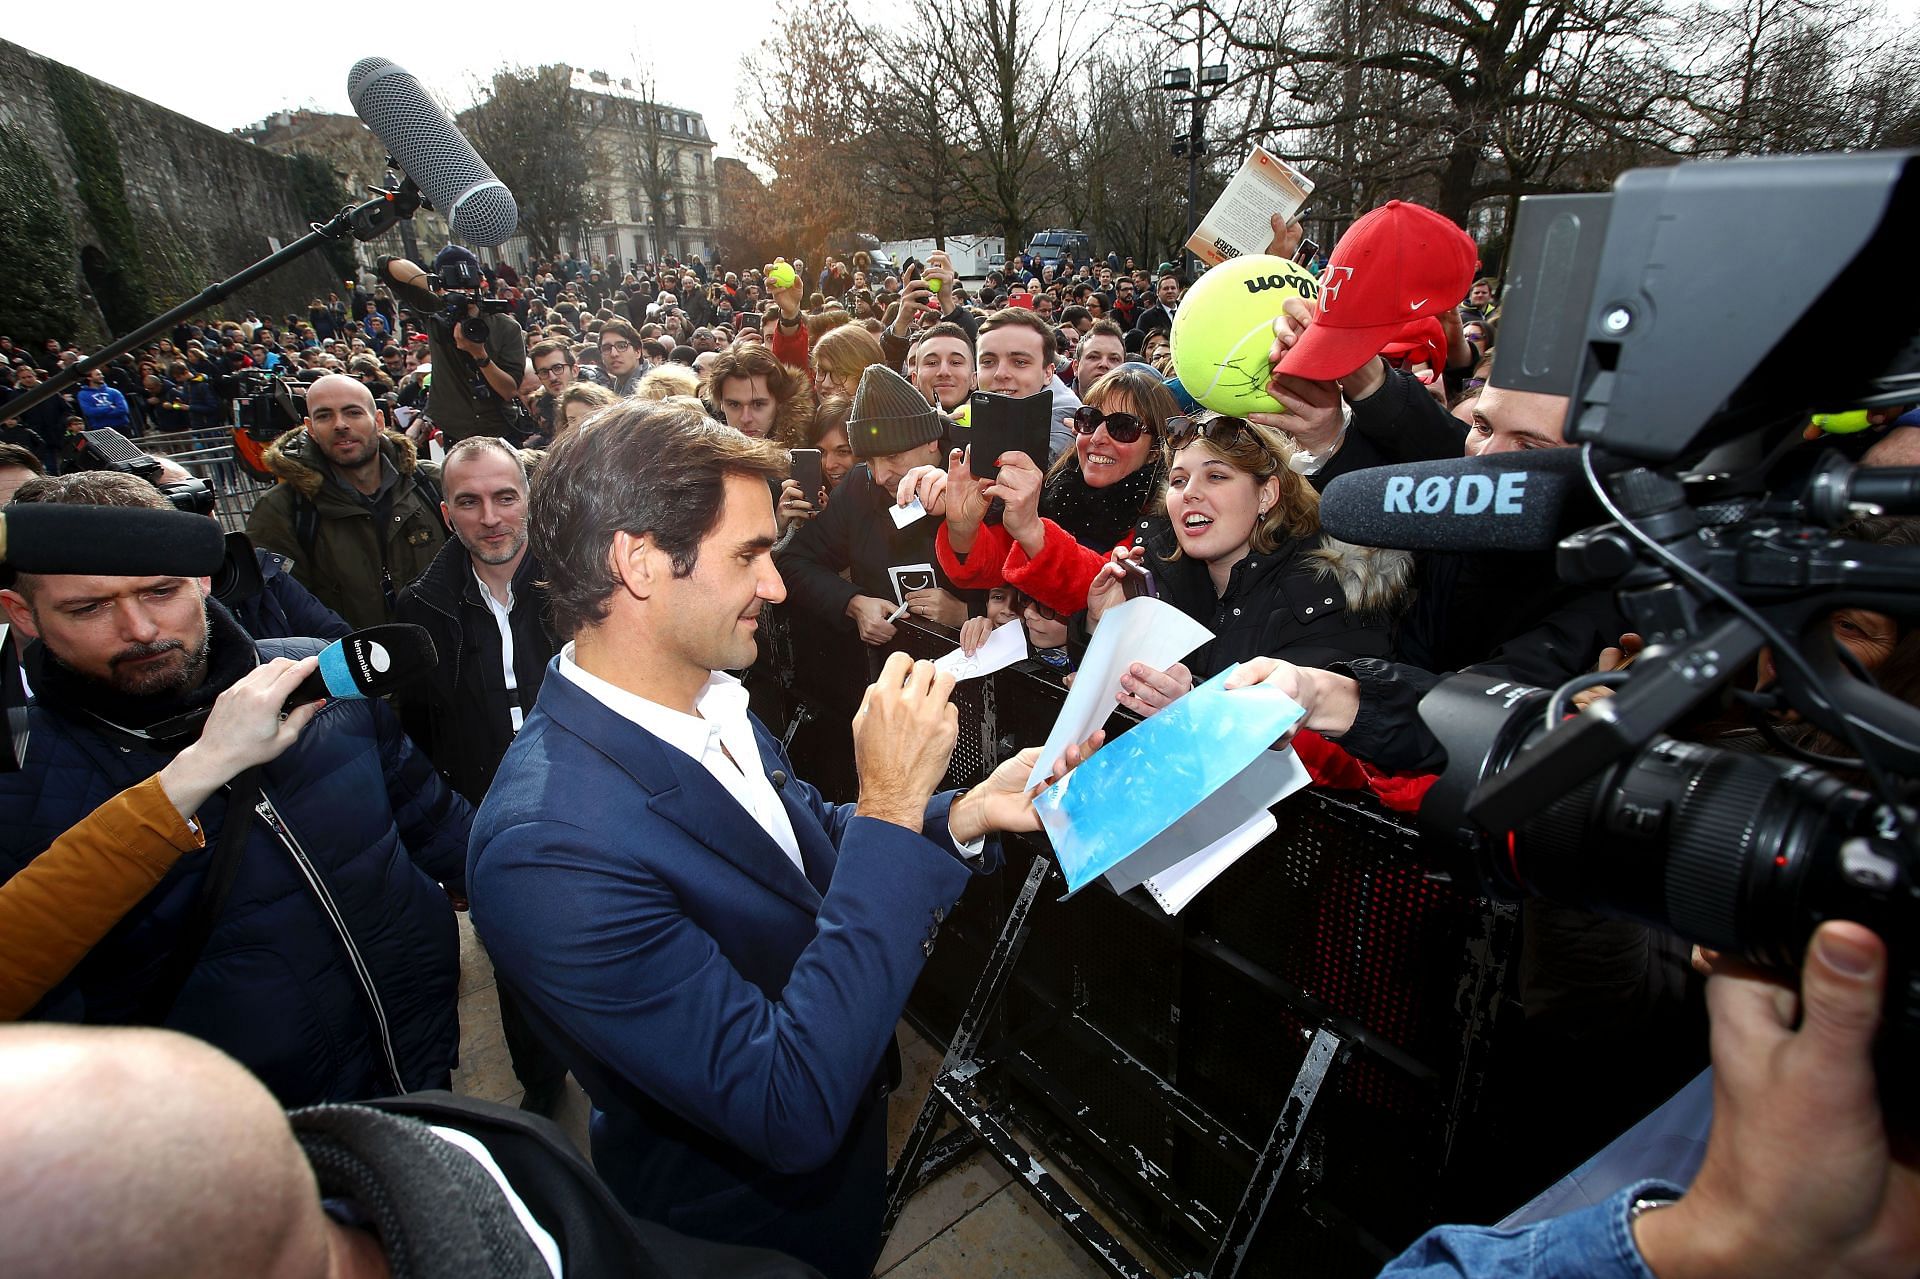 Roger Federer spoke about his experience with meeting fans out in public